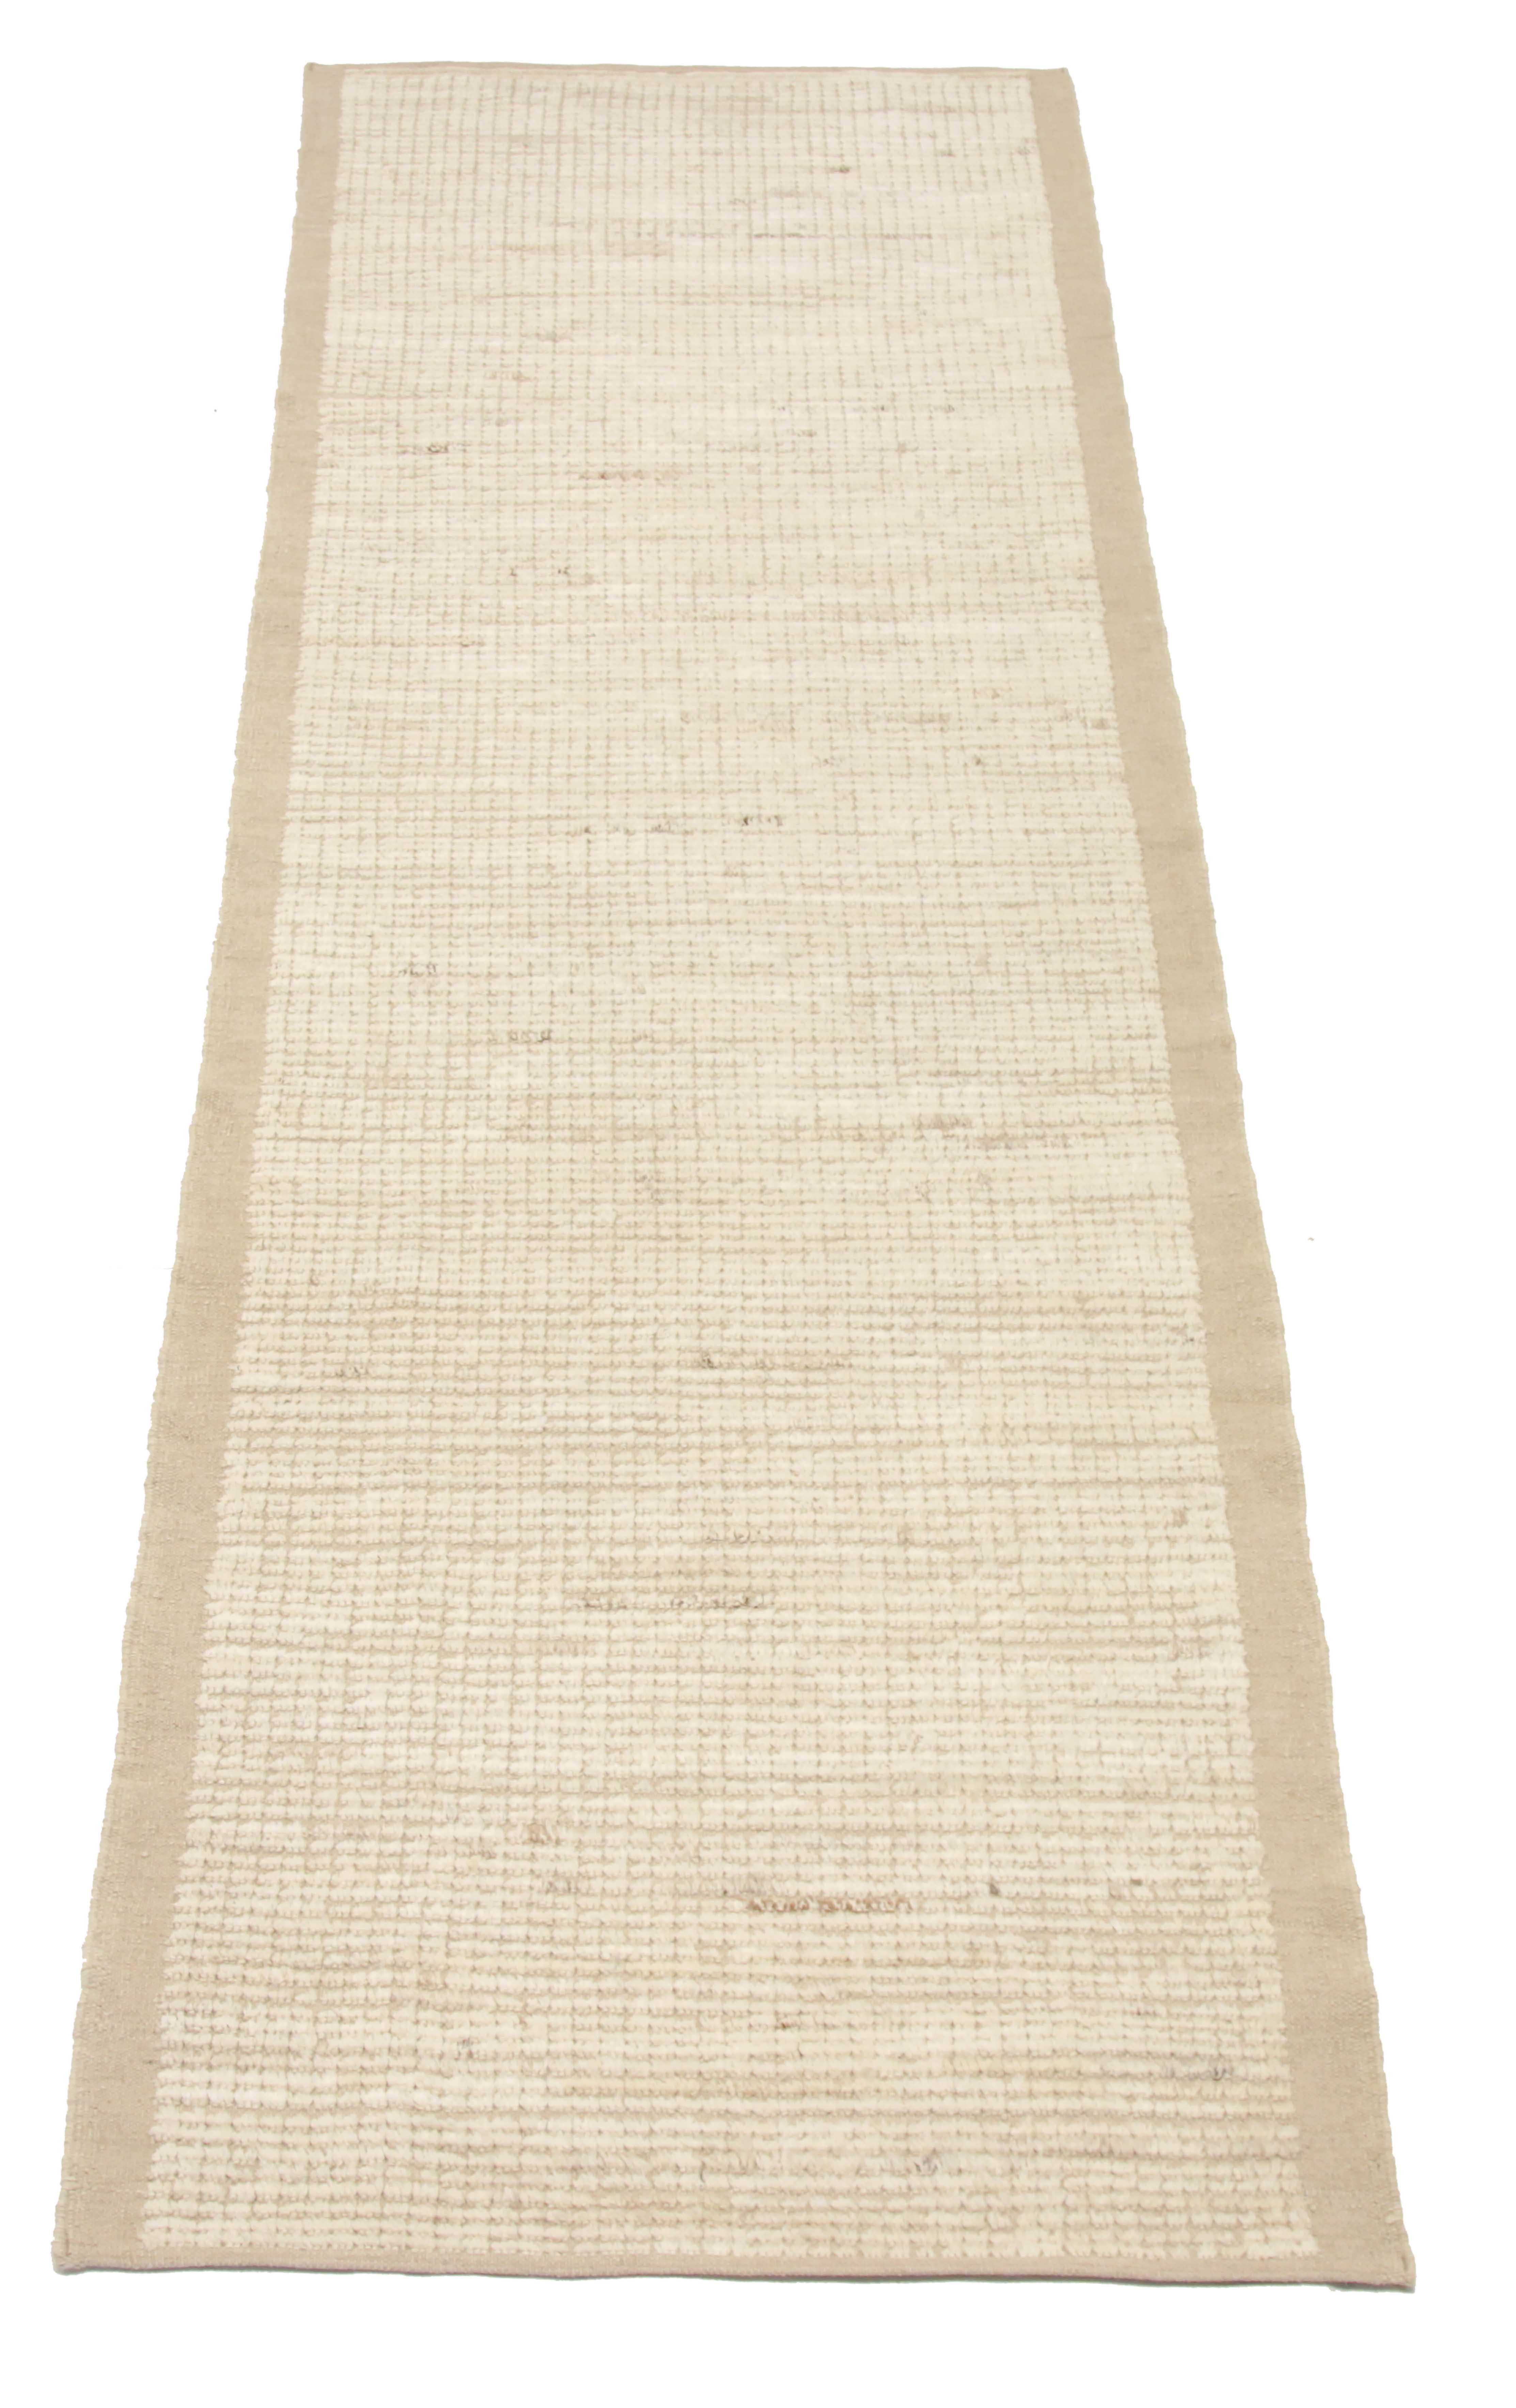 New Afghan runner rug handwoven from the finest sheep’s wool. It’s colored with all-natural vegetable dyes that are safe for humans and pets. It’s a traditional Moroccan design handwoven by expert artisans. It’s a lovely runner rug that can be